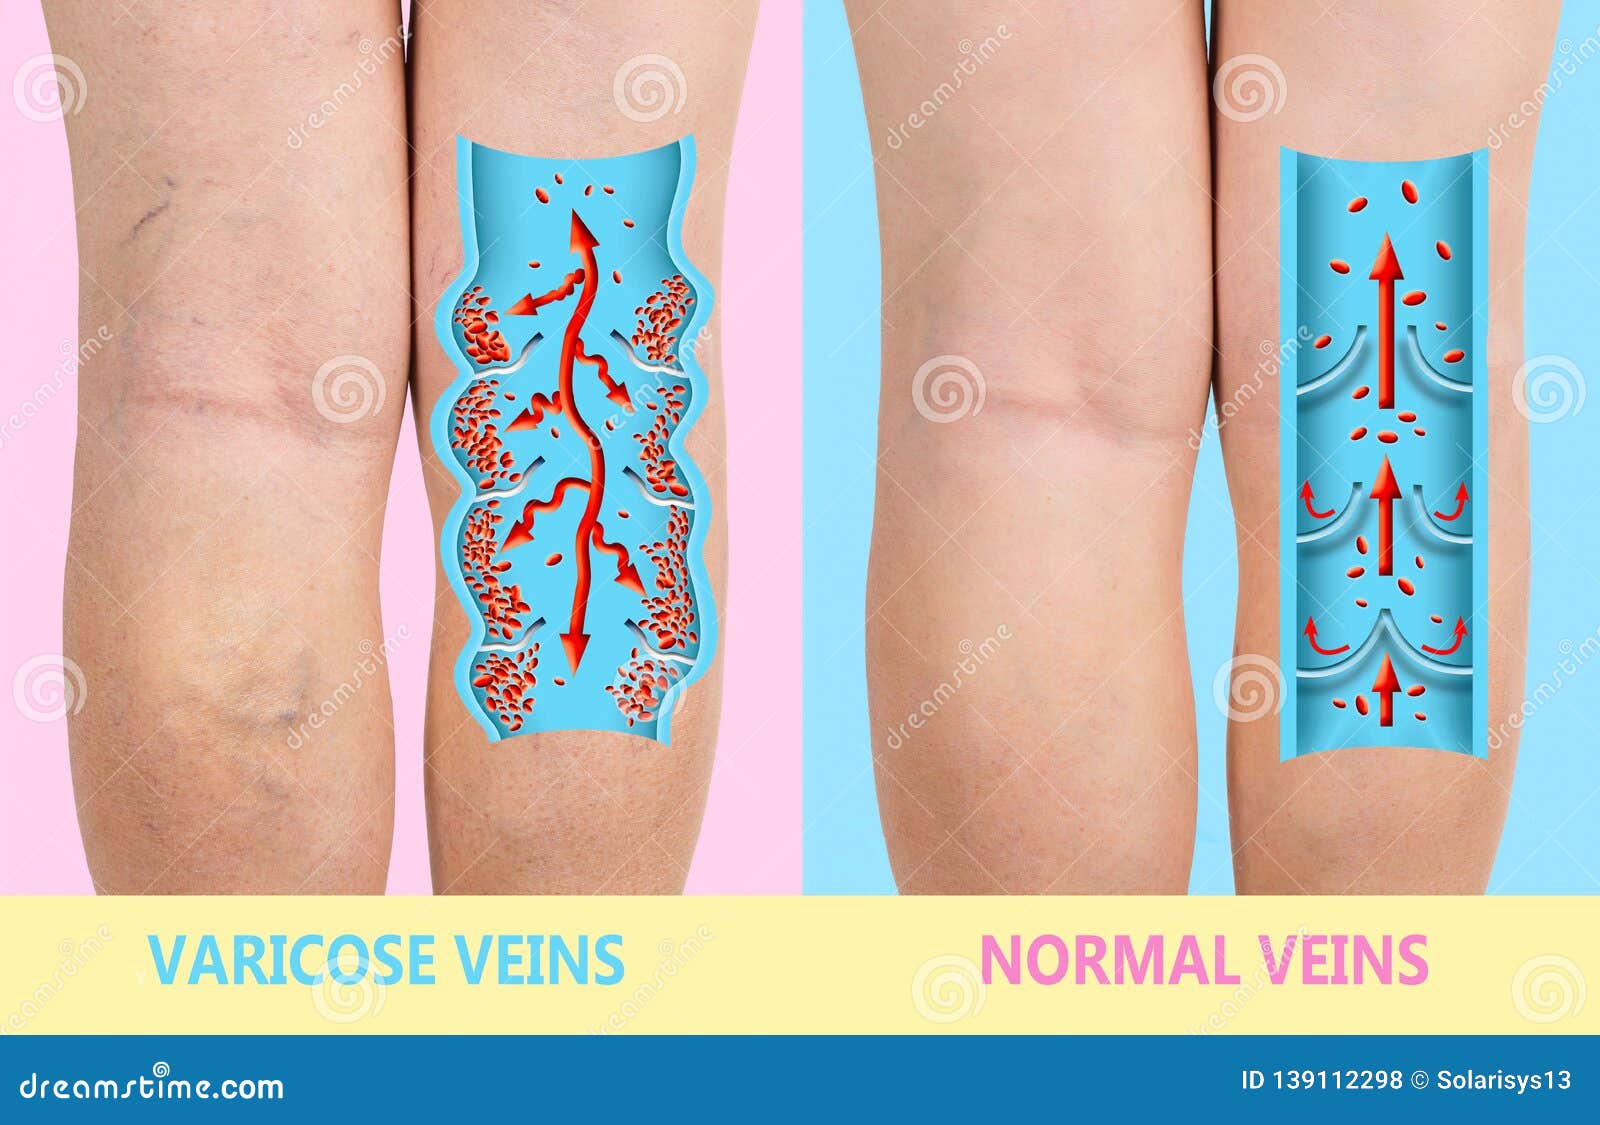 Prominent Dilated Tortuous Veins Called Varicose Stock Photo 1415239970   Shutterstock